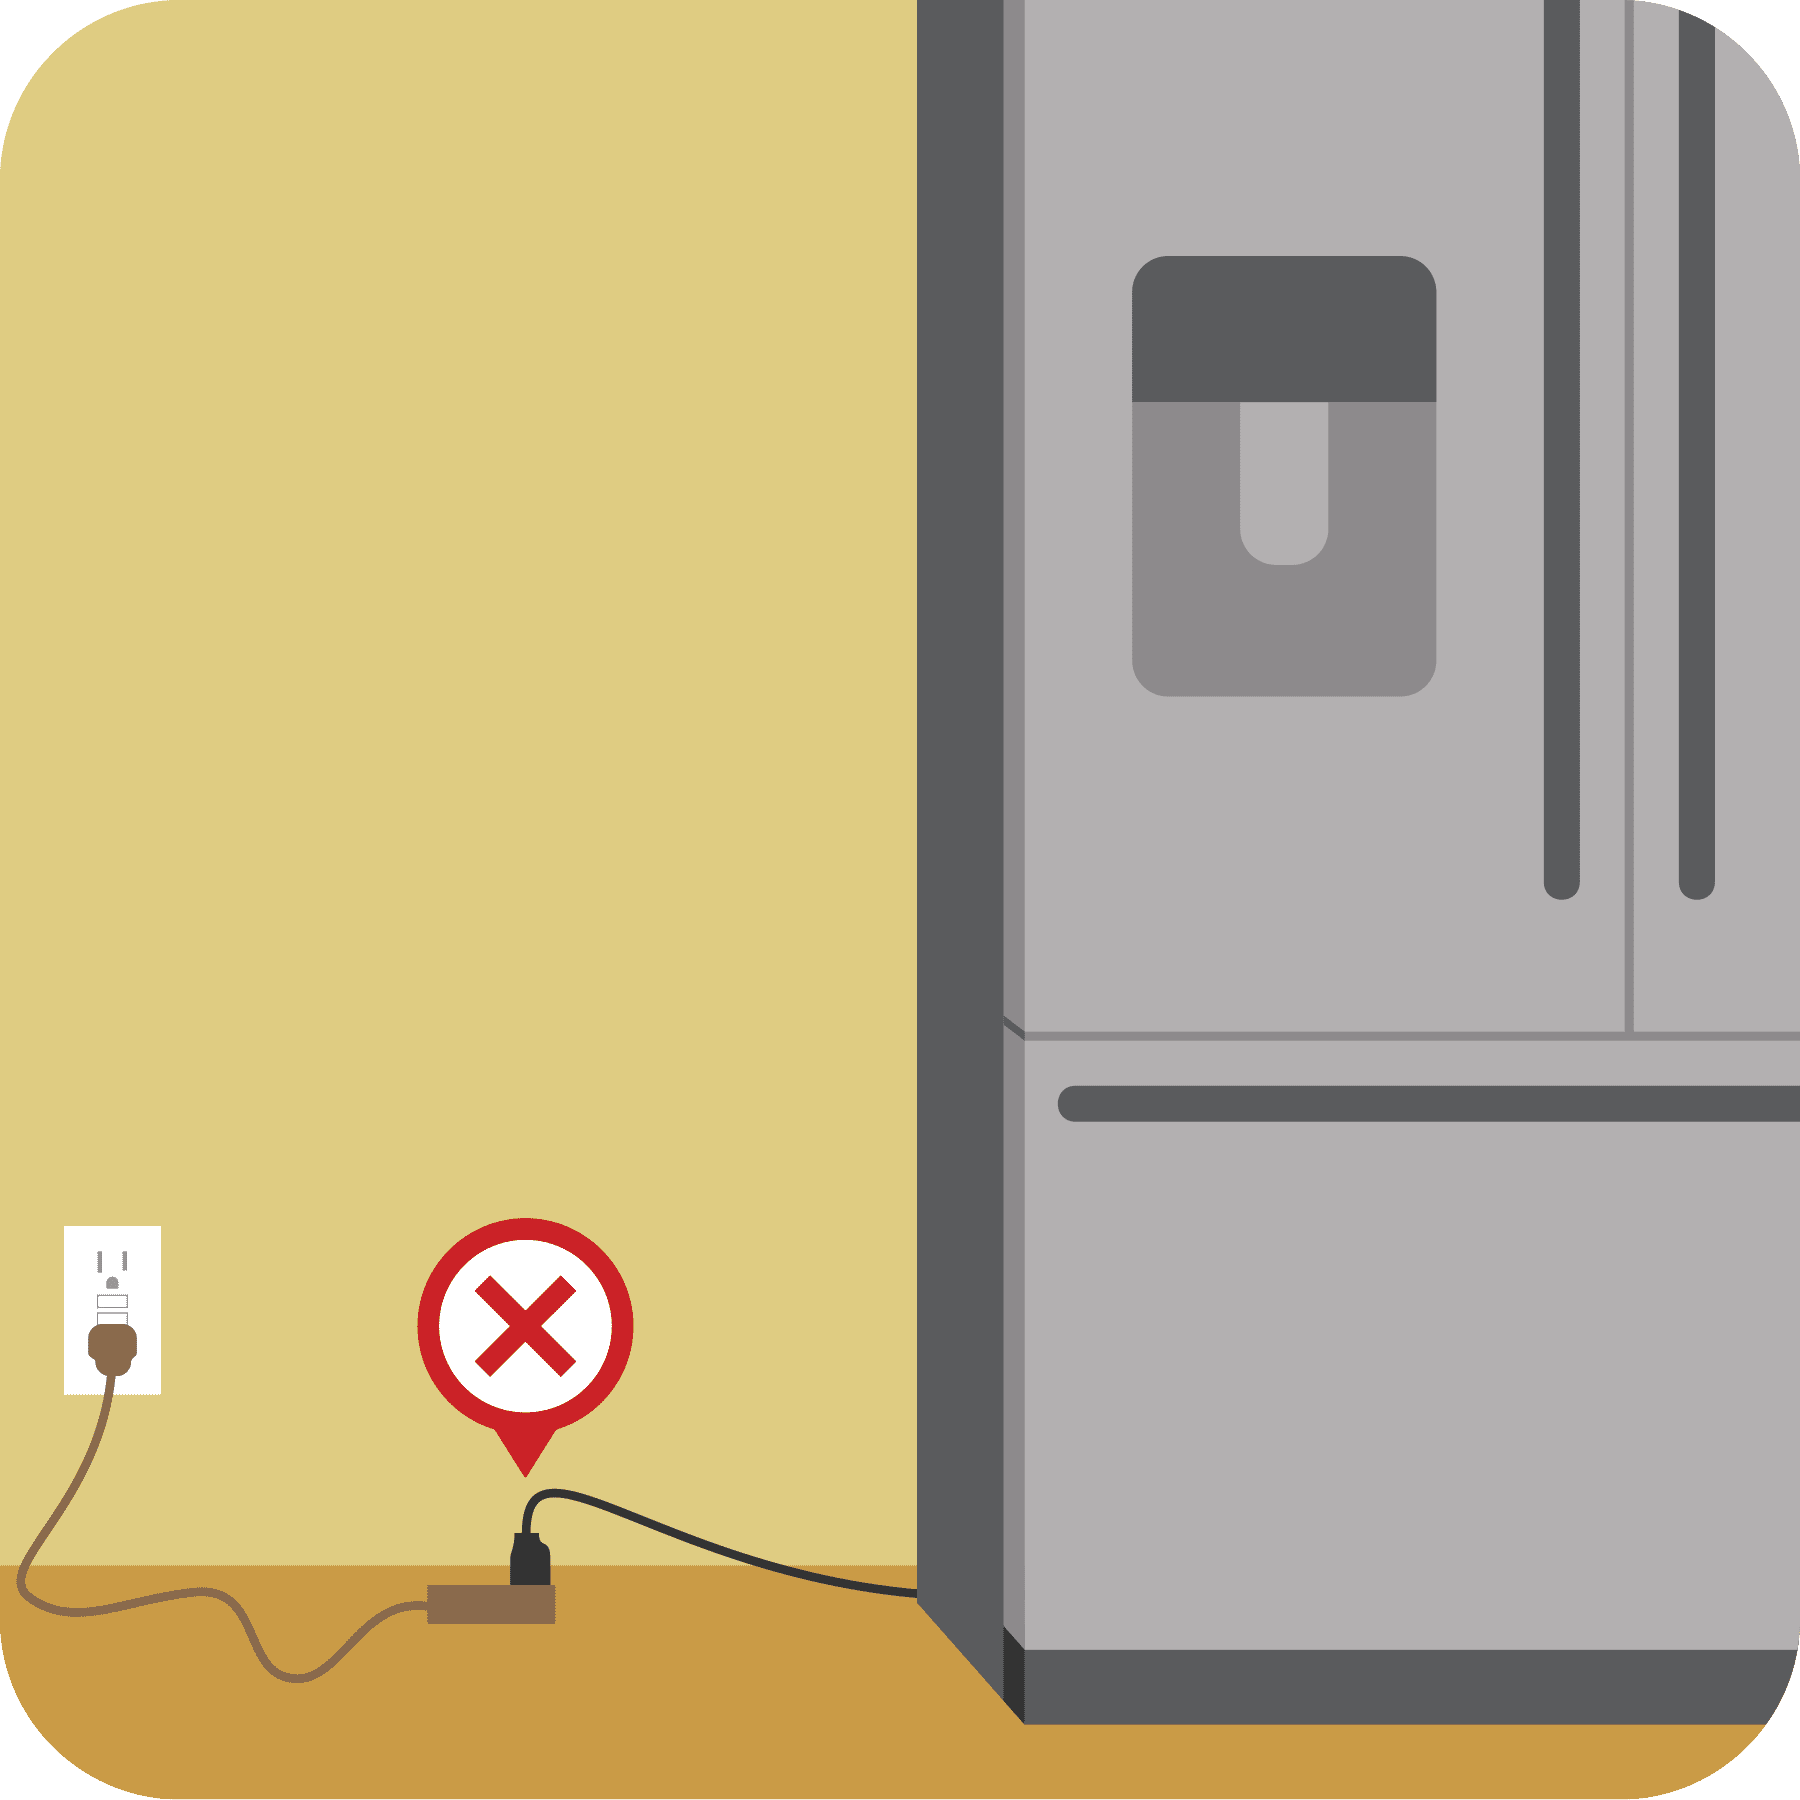 Electrical Safety First on X: Before plugging your appliances in